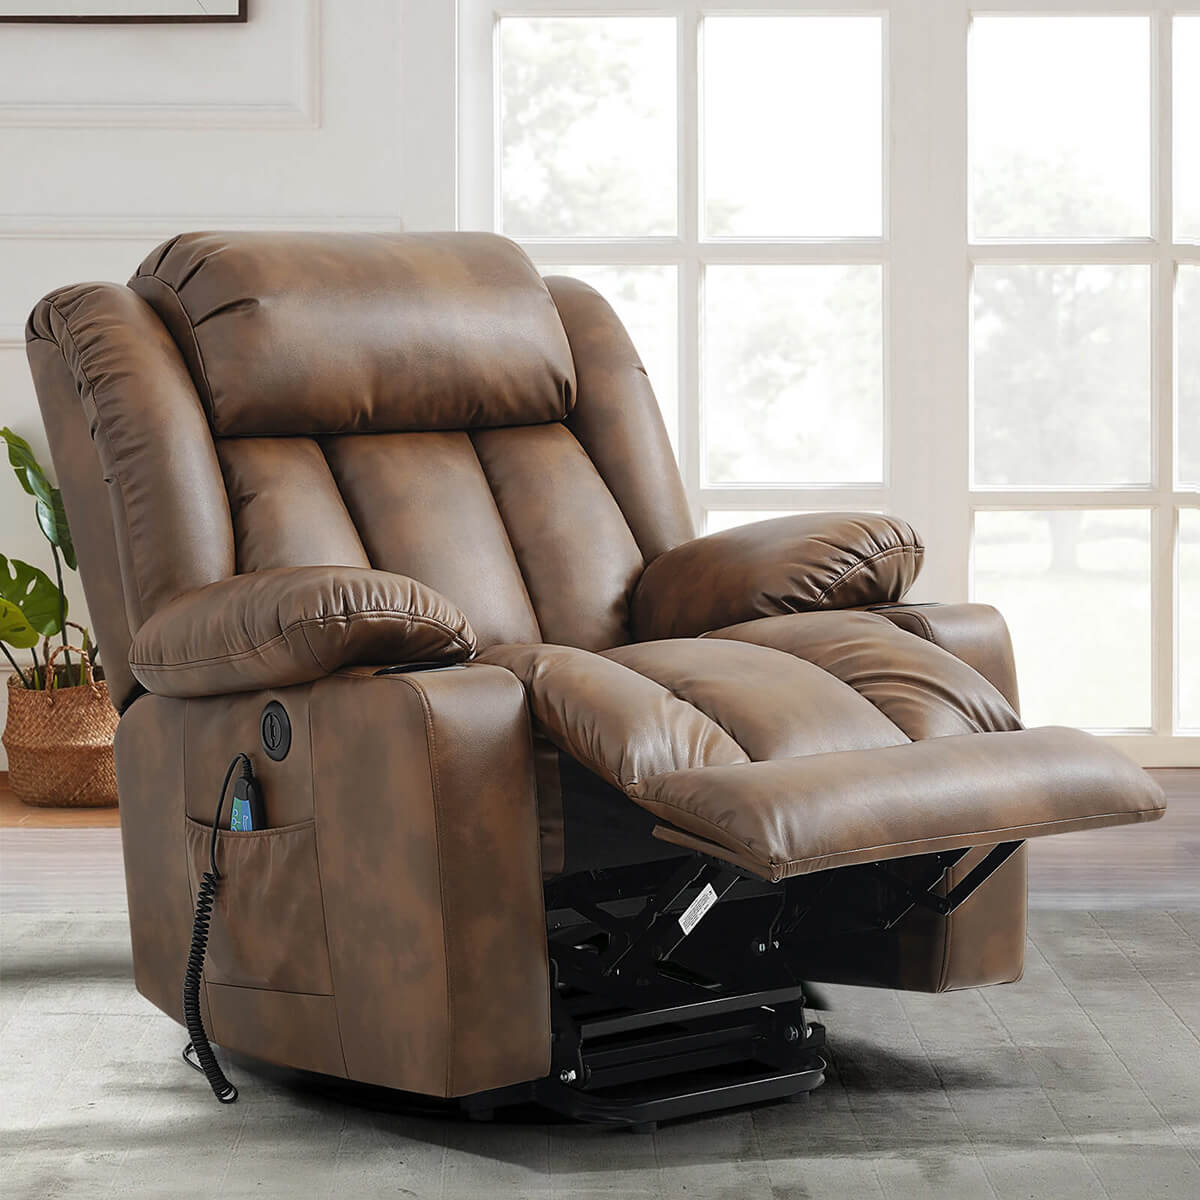 soulout power lift chair light brown